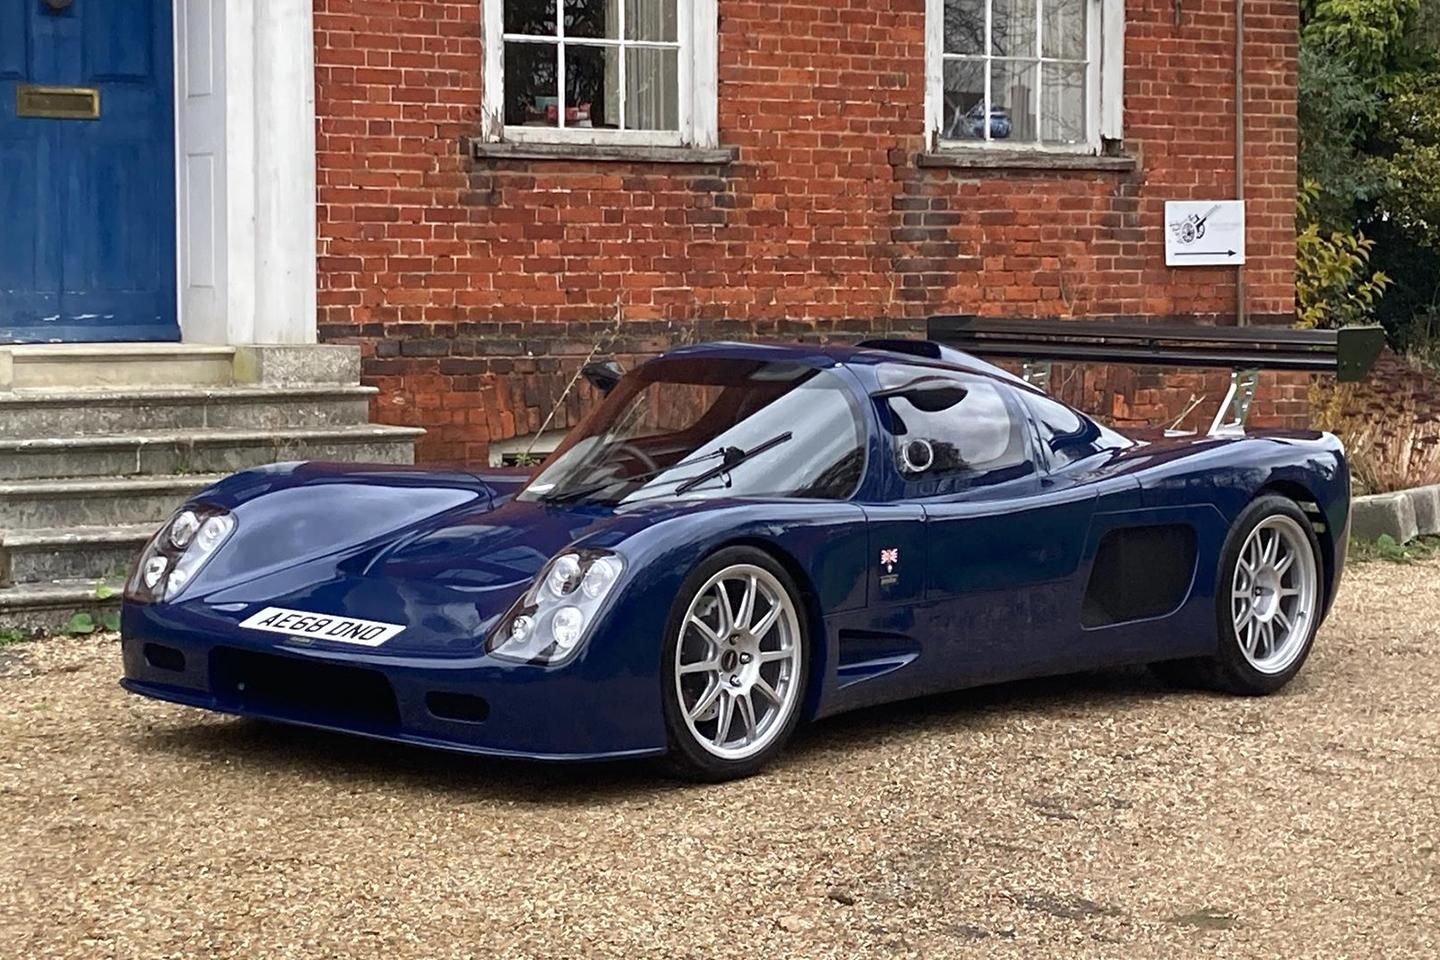 View Photos of the 2000 Ultima GTR